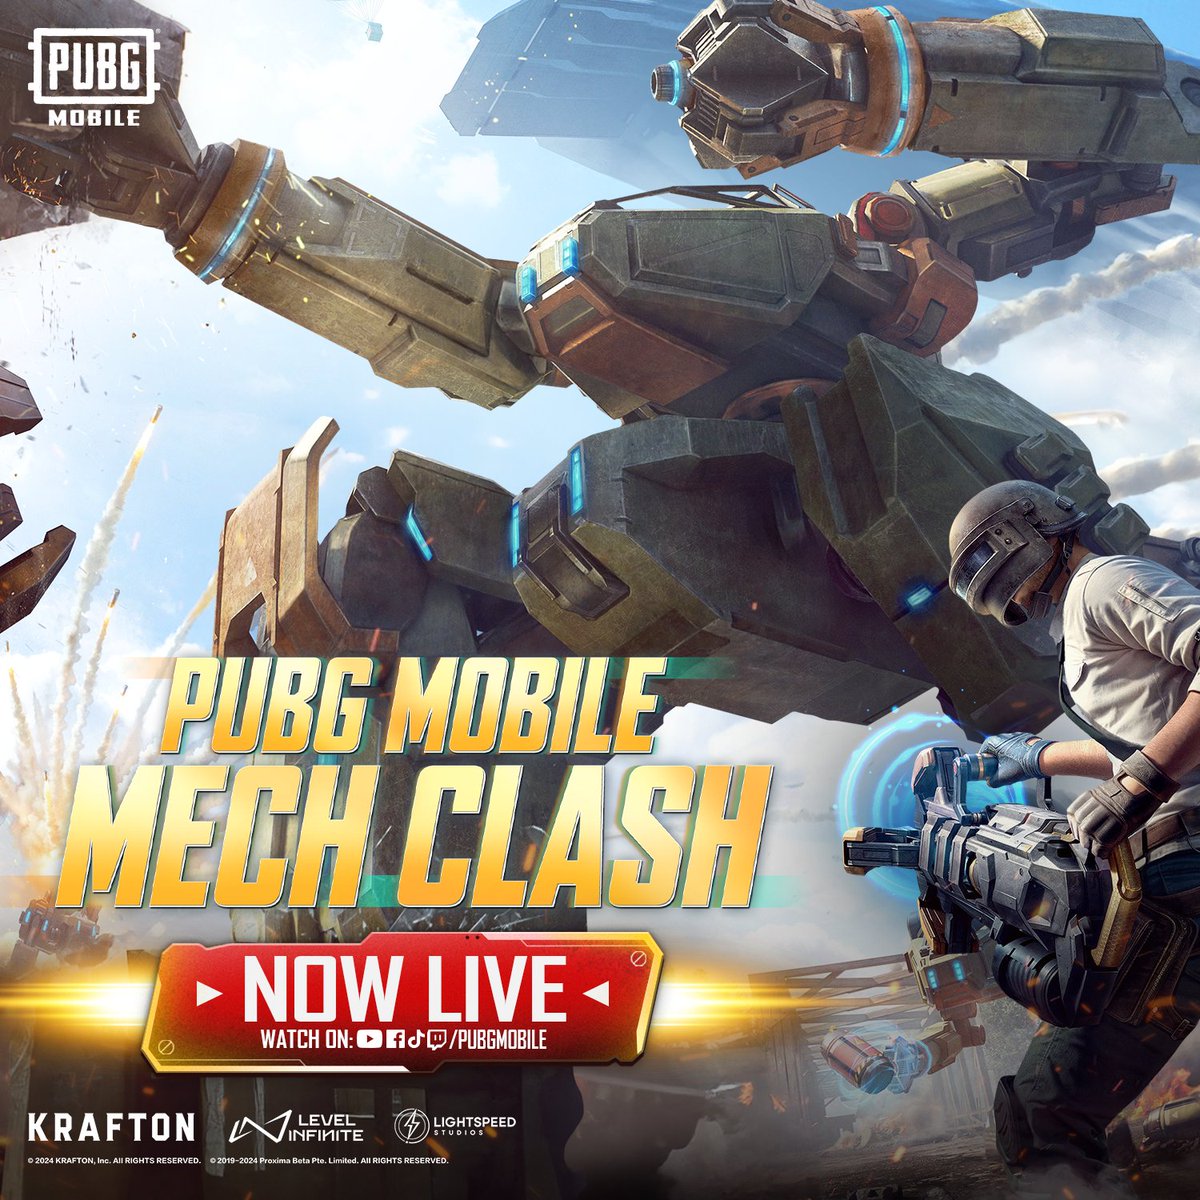 Catch Team Mecha Masters LIVE in the #PUBGMOBILE Mech Clash event! Don't miss the action here: pubgmobile.live/MechClashYT #PUBGMOBILEV320 #PUBGMOBILEMECH #PUBGMMECHCLASH #PUBGMOBILEC6S18 #ad #PUBGMVIP #REDEYESPUBGM @PUBGMOBILE @AMGinfluence @PUBGMOBILE_NA_